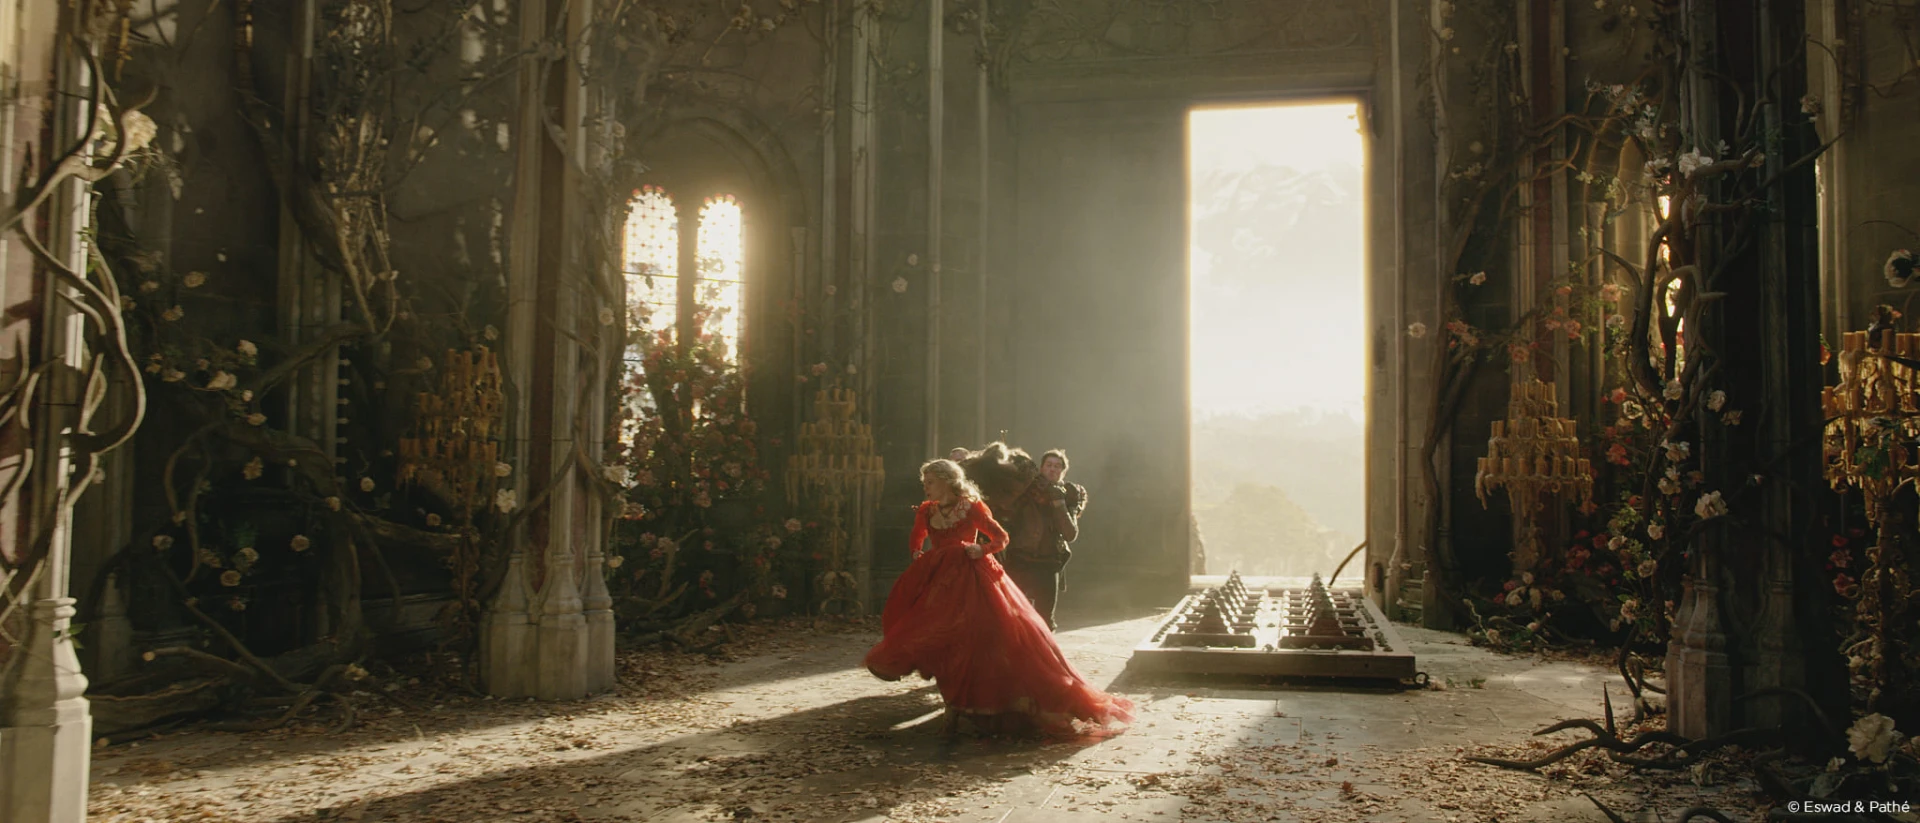 Beauty and the beast, Beauty running  in castle corridor Raynault vfx